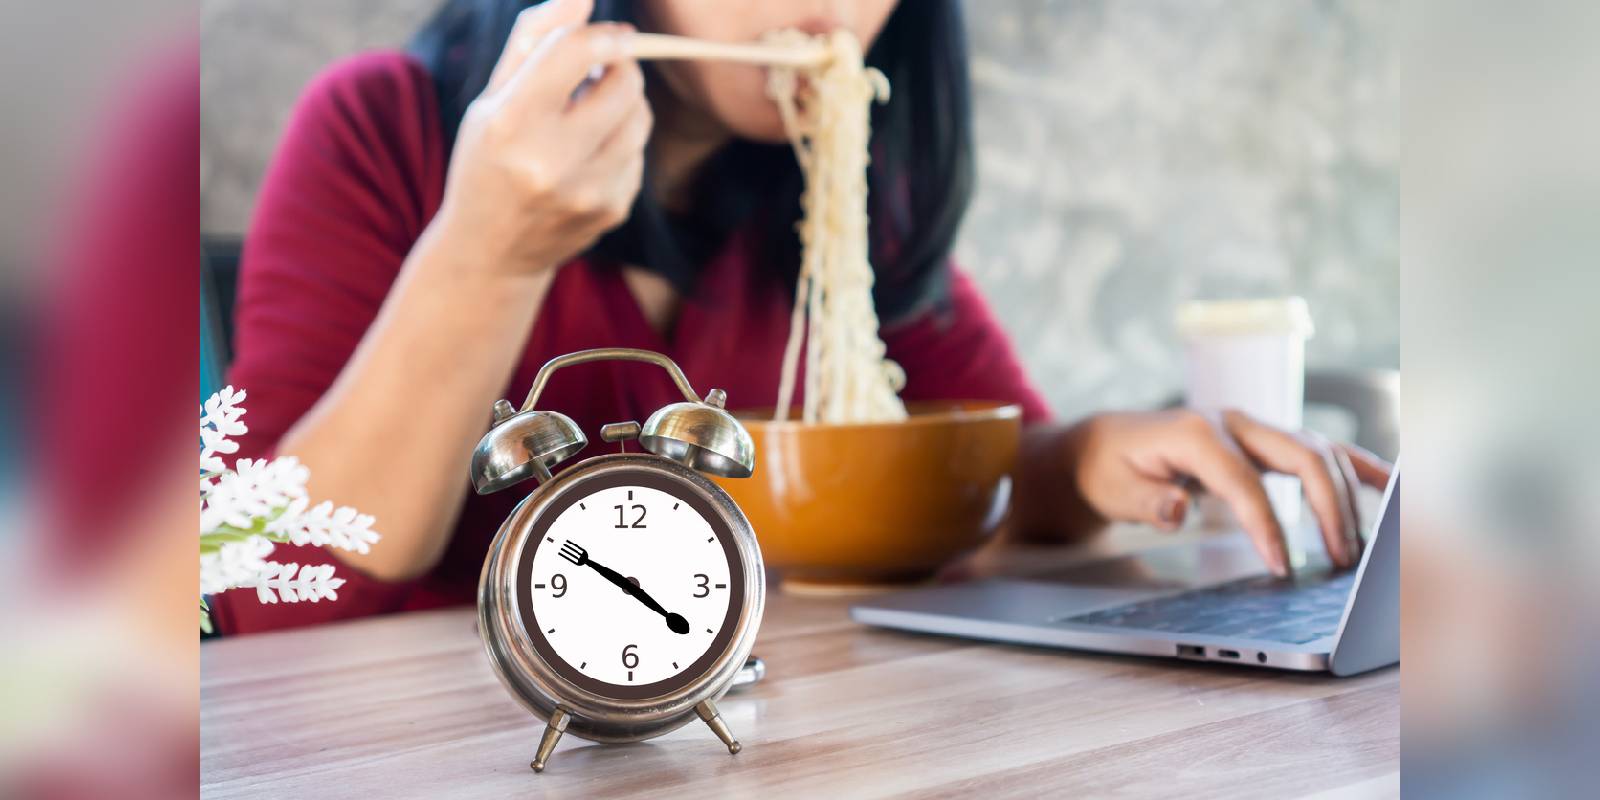 Do you eat too fast? Find out why meal duration matters